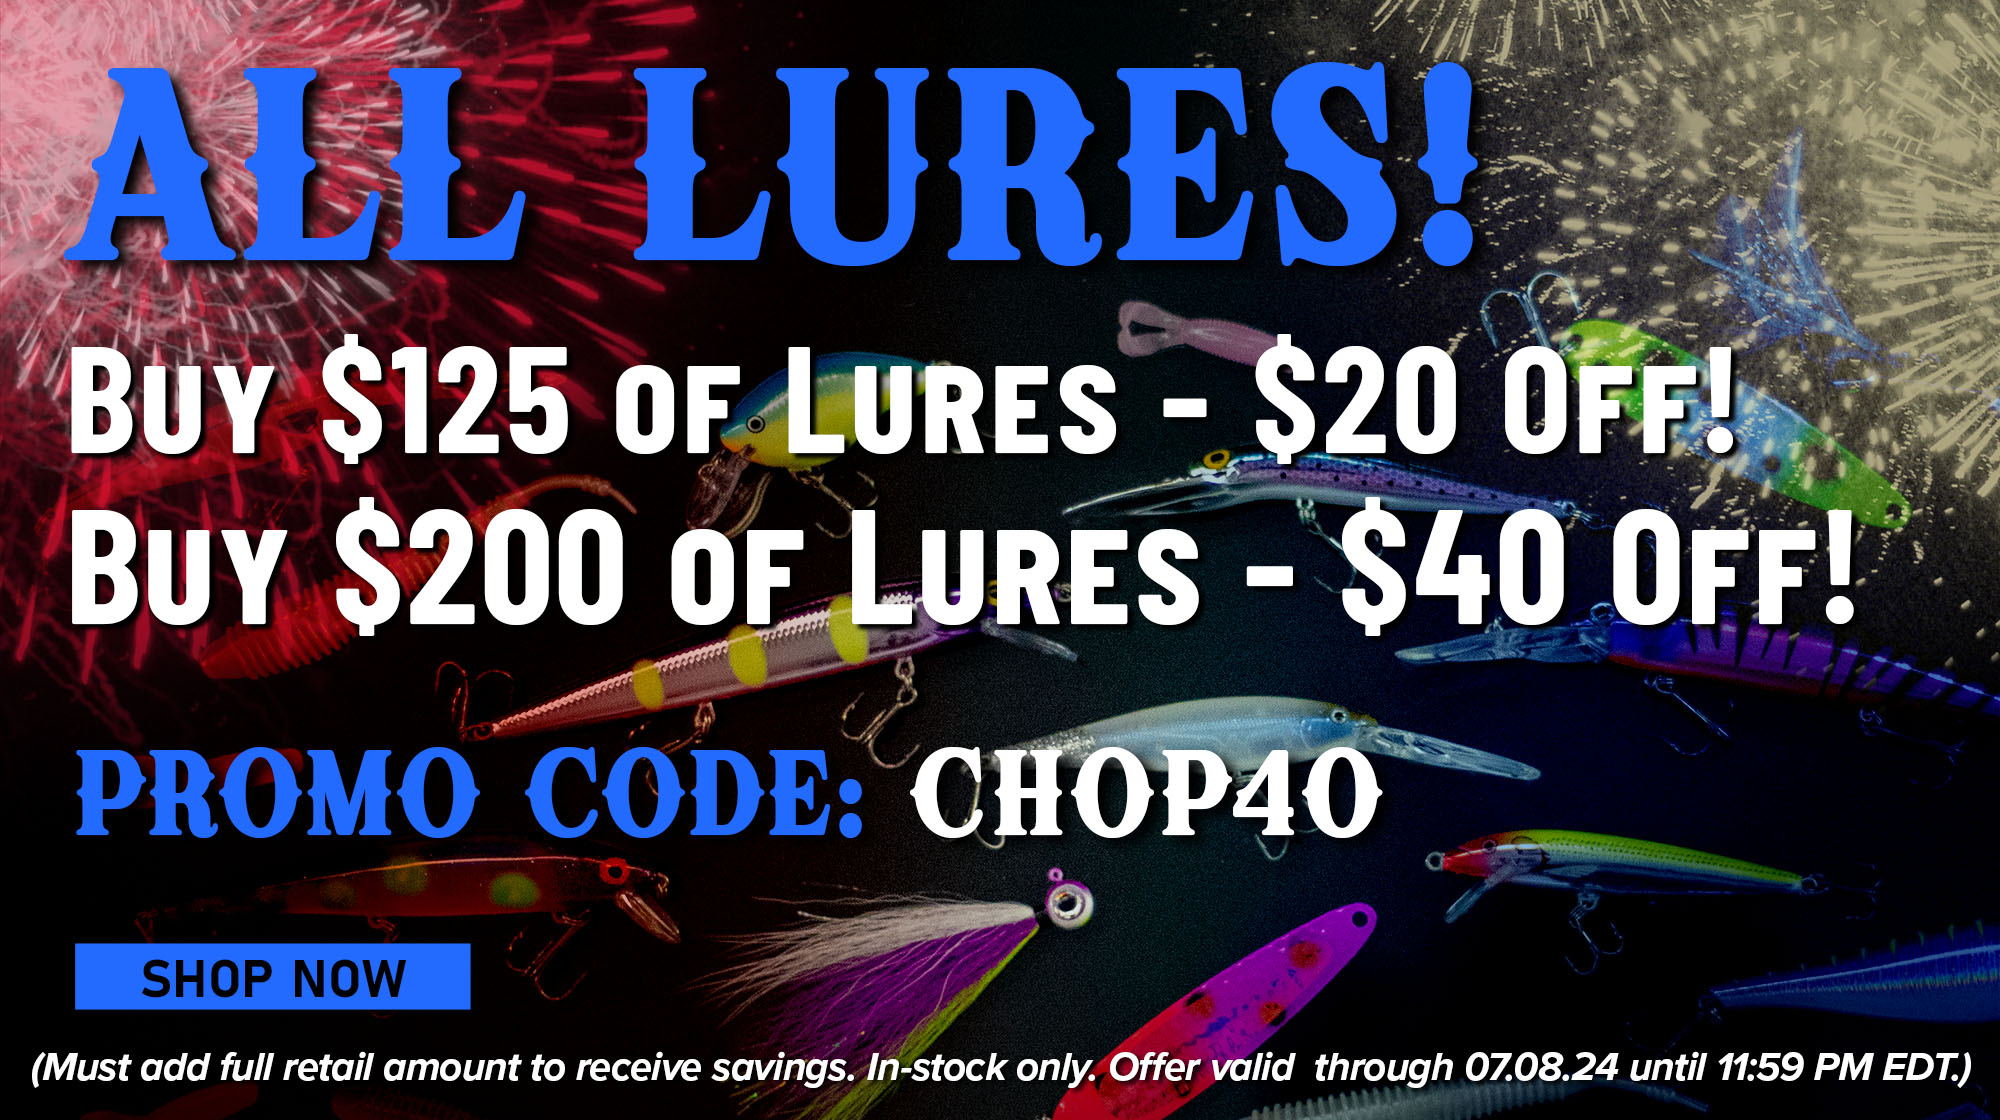 All Lures! Buy $125 of Lures - $20 Off! Buy $200 of Lures - $40 Off! Promo Code: CHOP40 Shop Now (Must add full retail amount to receive savings. In-stock only. Offer valid through 07.08.24 until 11:59 PM EDT.)